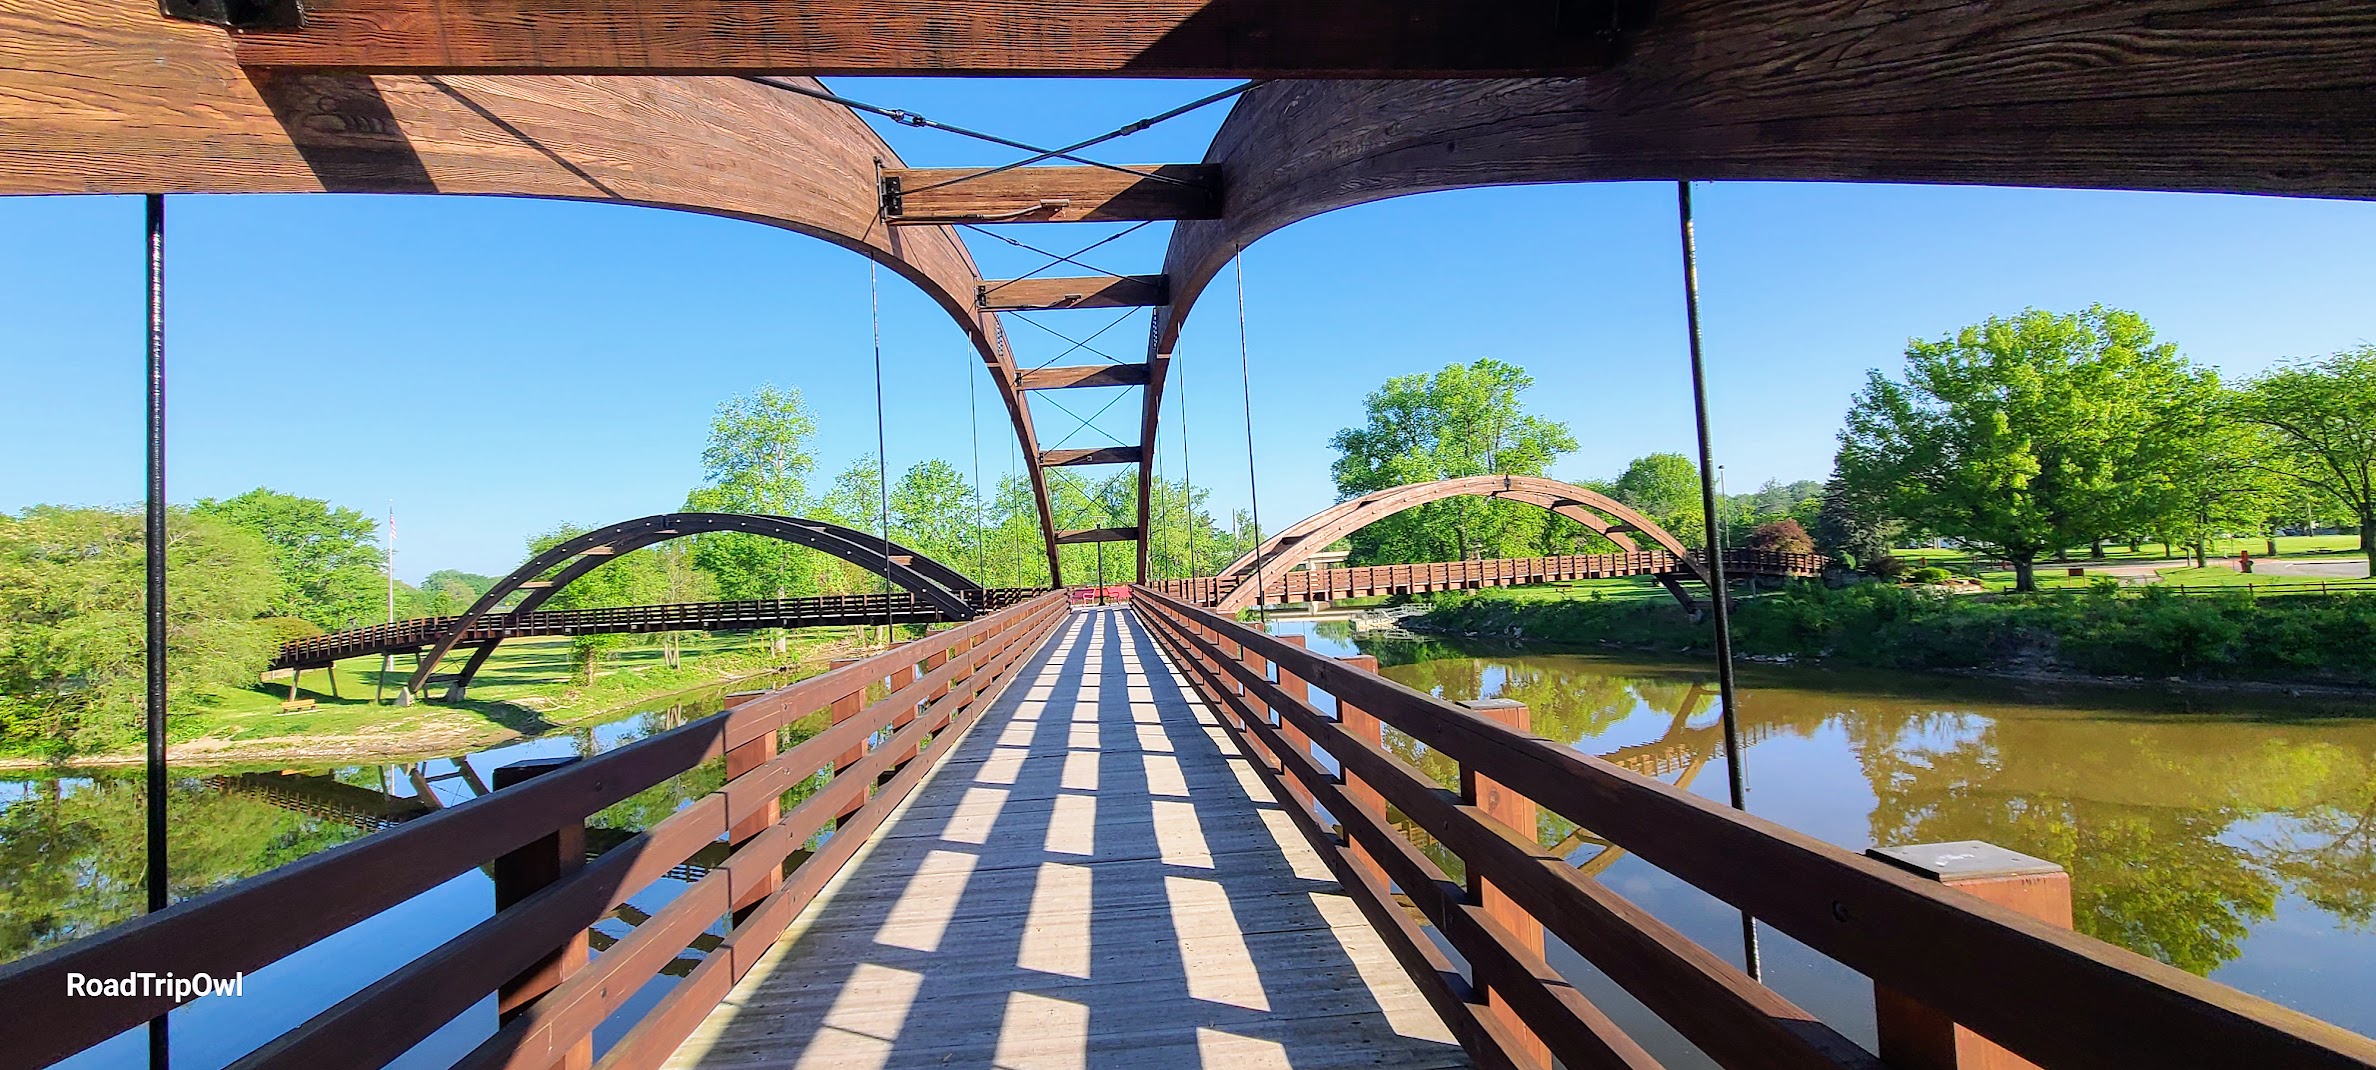 The Tridge (Midland) - A three-way wooden footbridge located where the Chippewa and Tittabawassee Rivers meet in Chippewassee Park, Midland, Michigan.